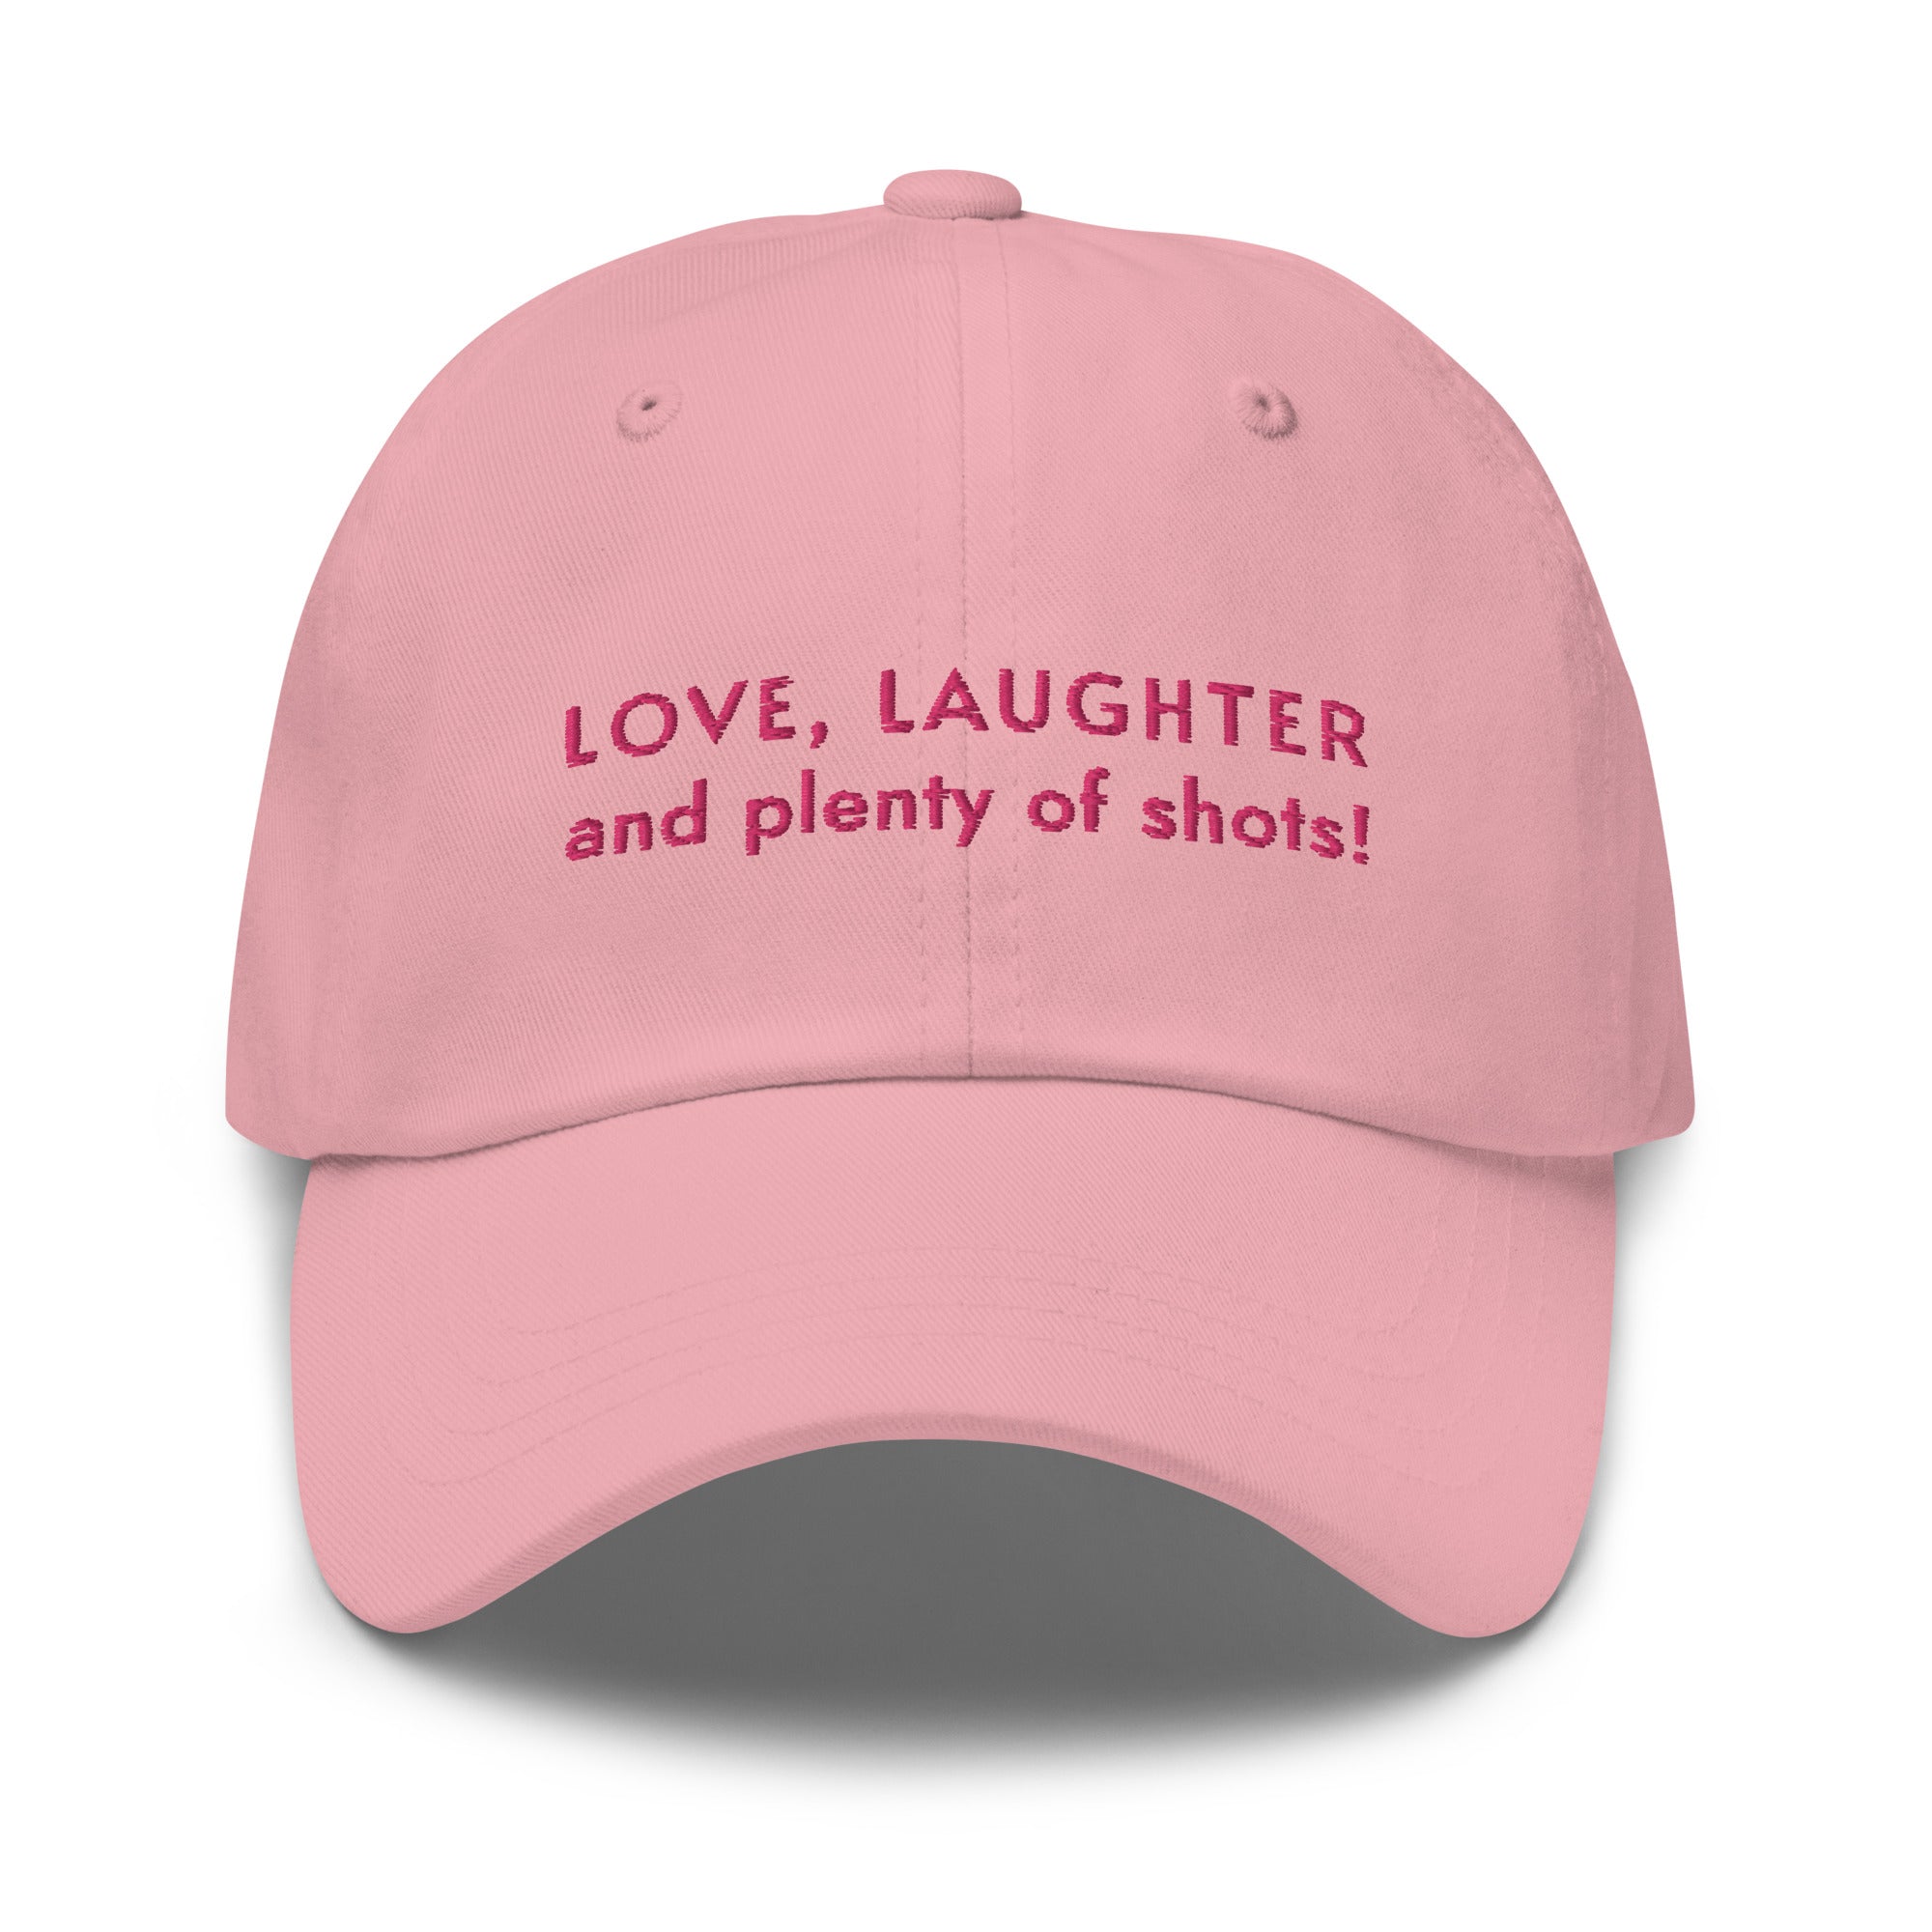 Love, laughter and plenty of shots Cap